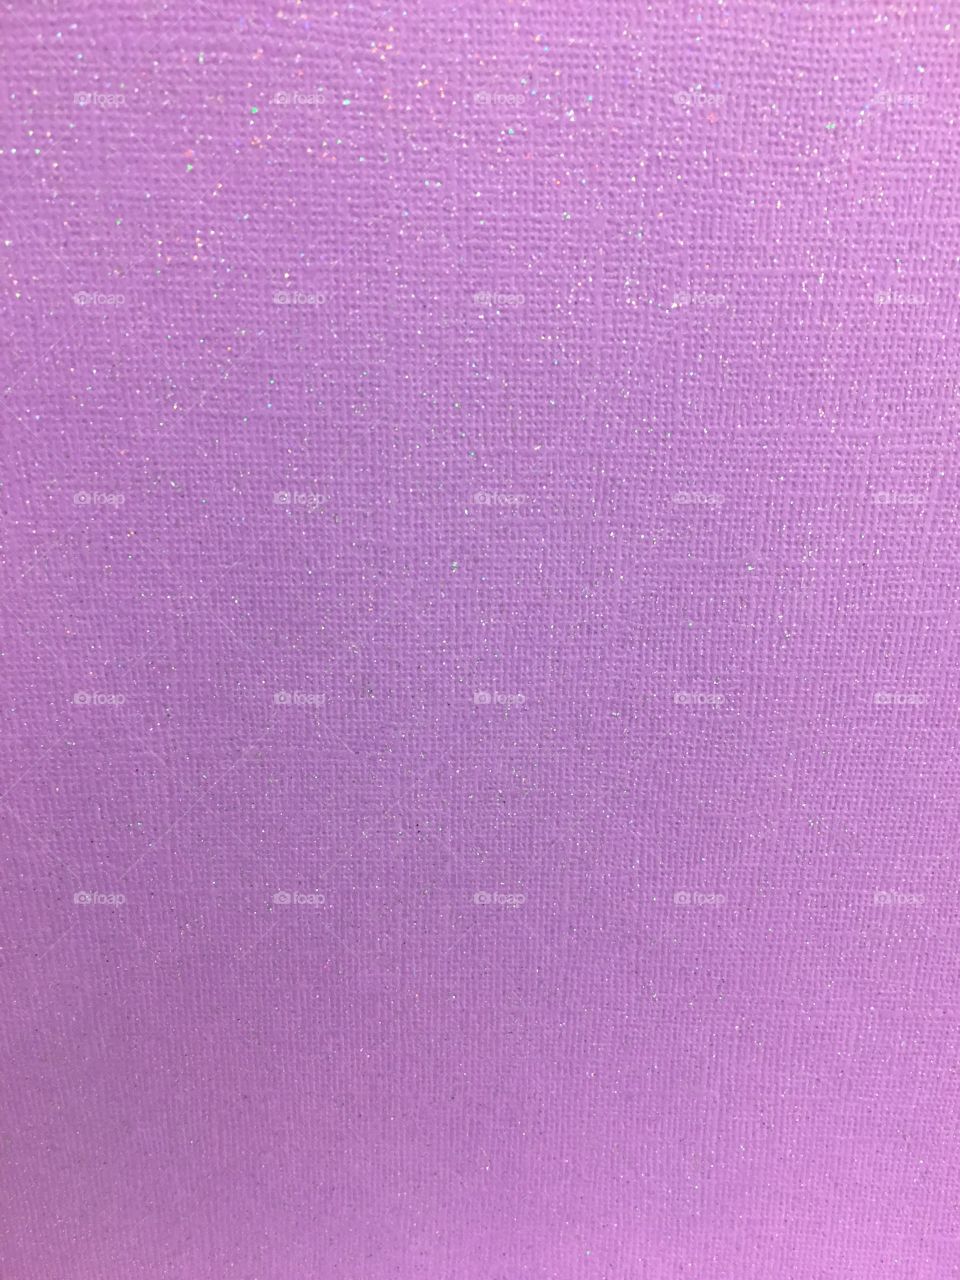 Close-up of purple background